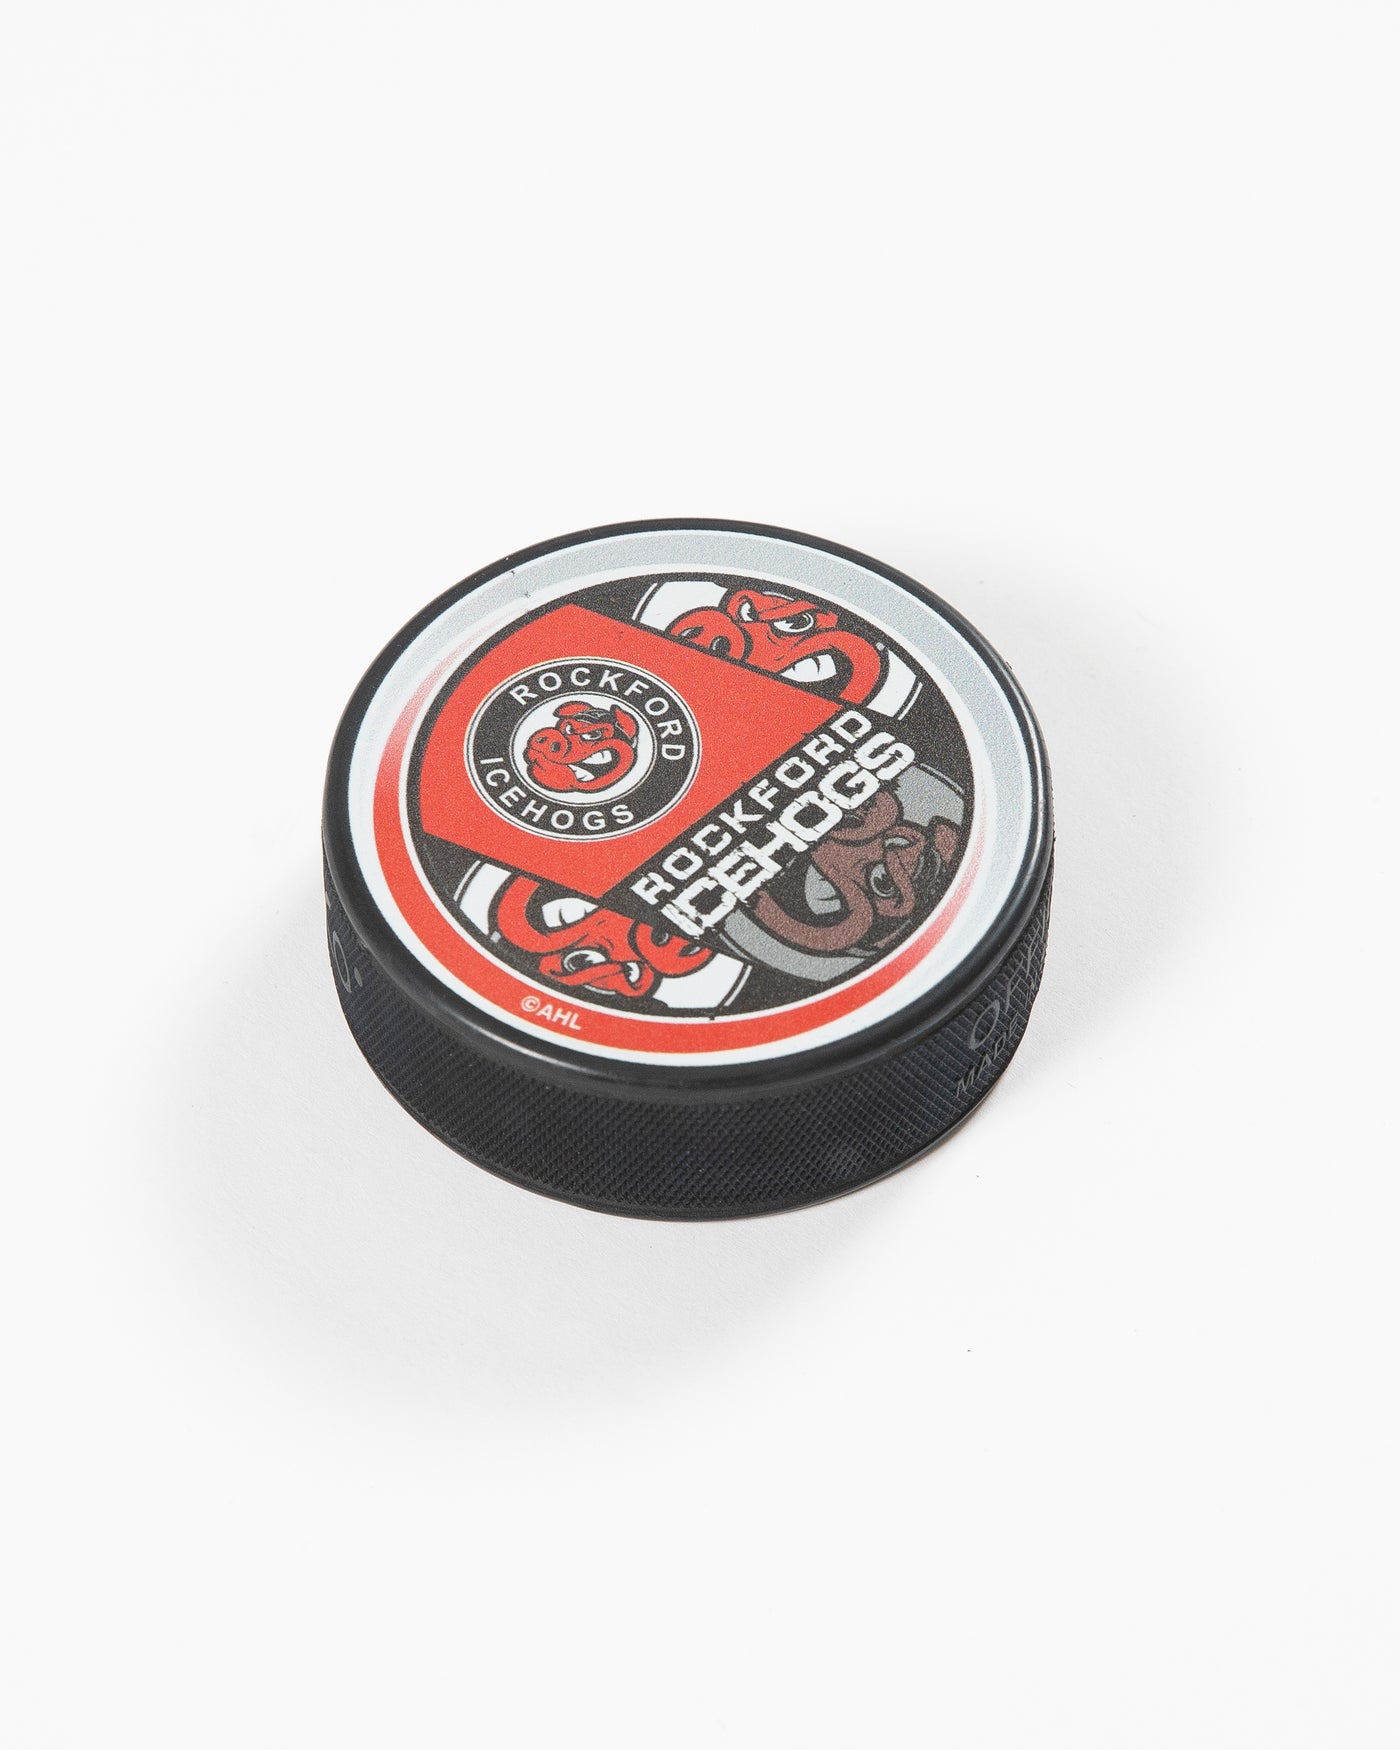 Rockford IceHogs puck with multi logo pattern - angled lay flat